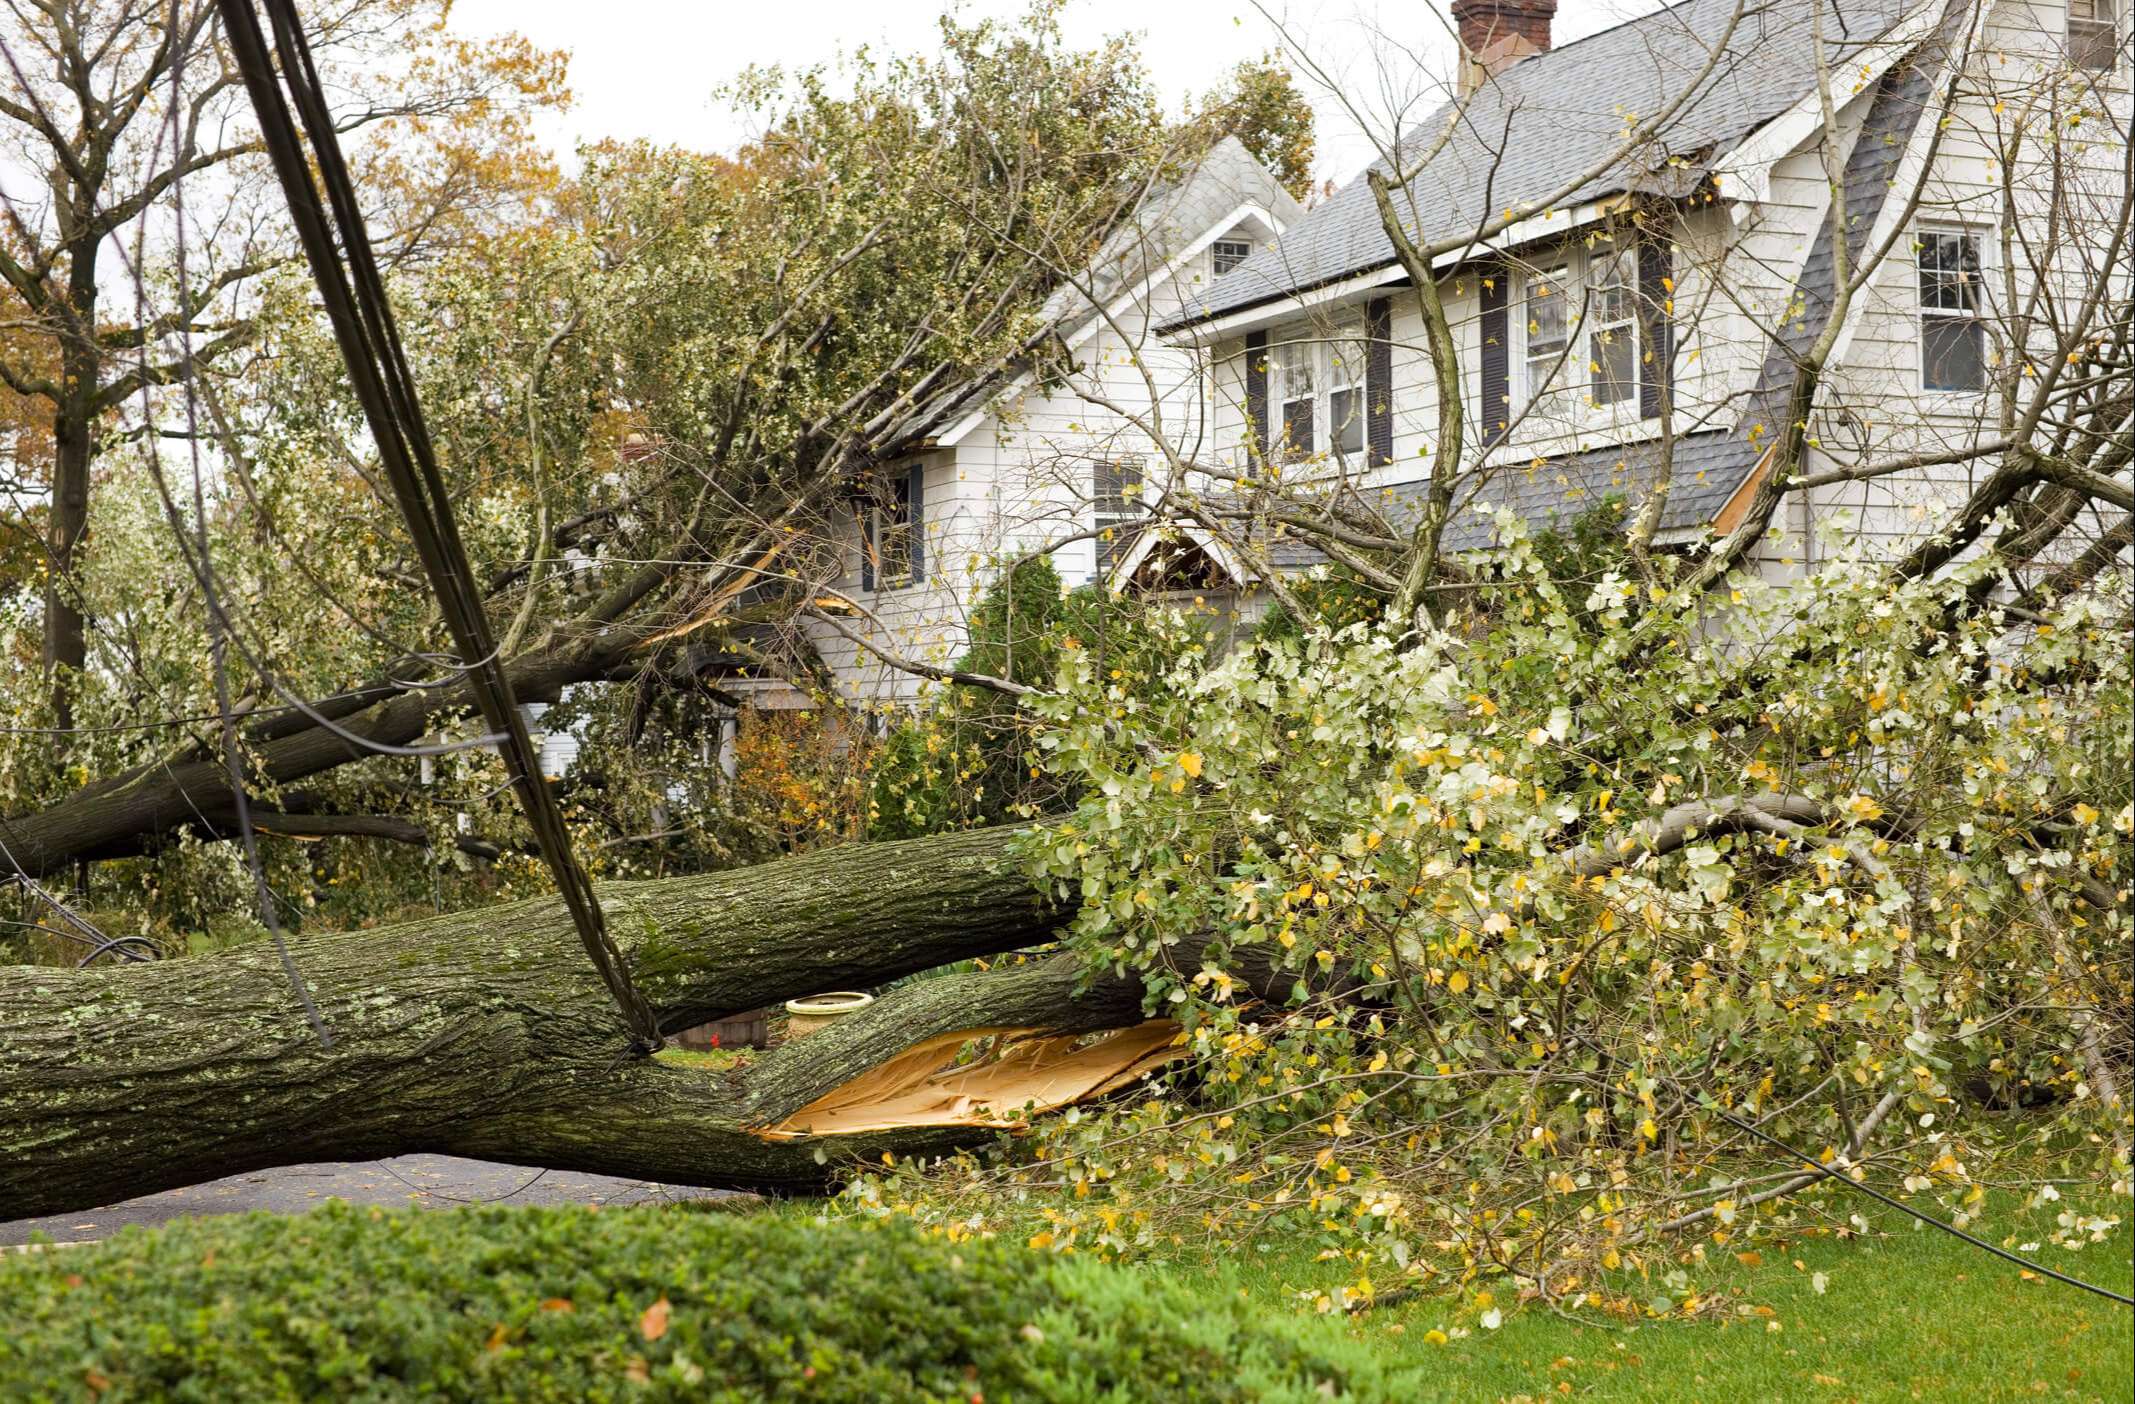 Find The Best Storm Damage Restoration in the Baltimore, MD Area